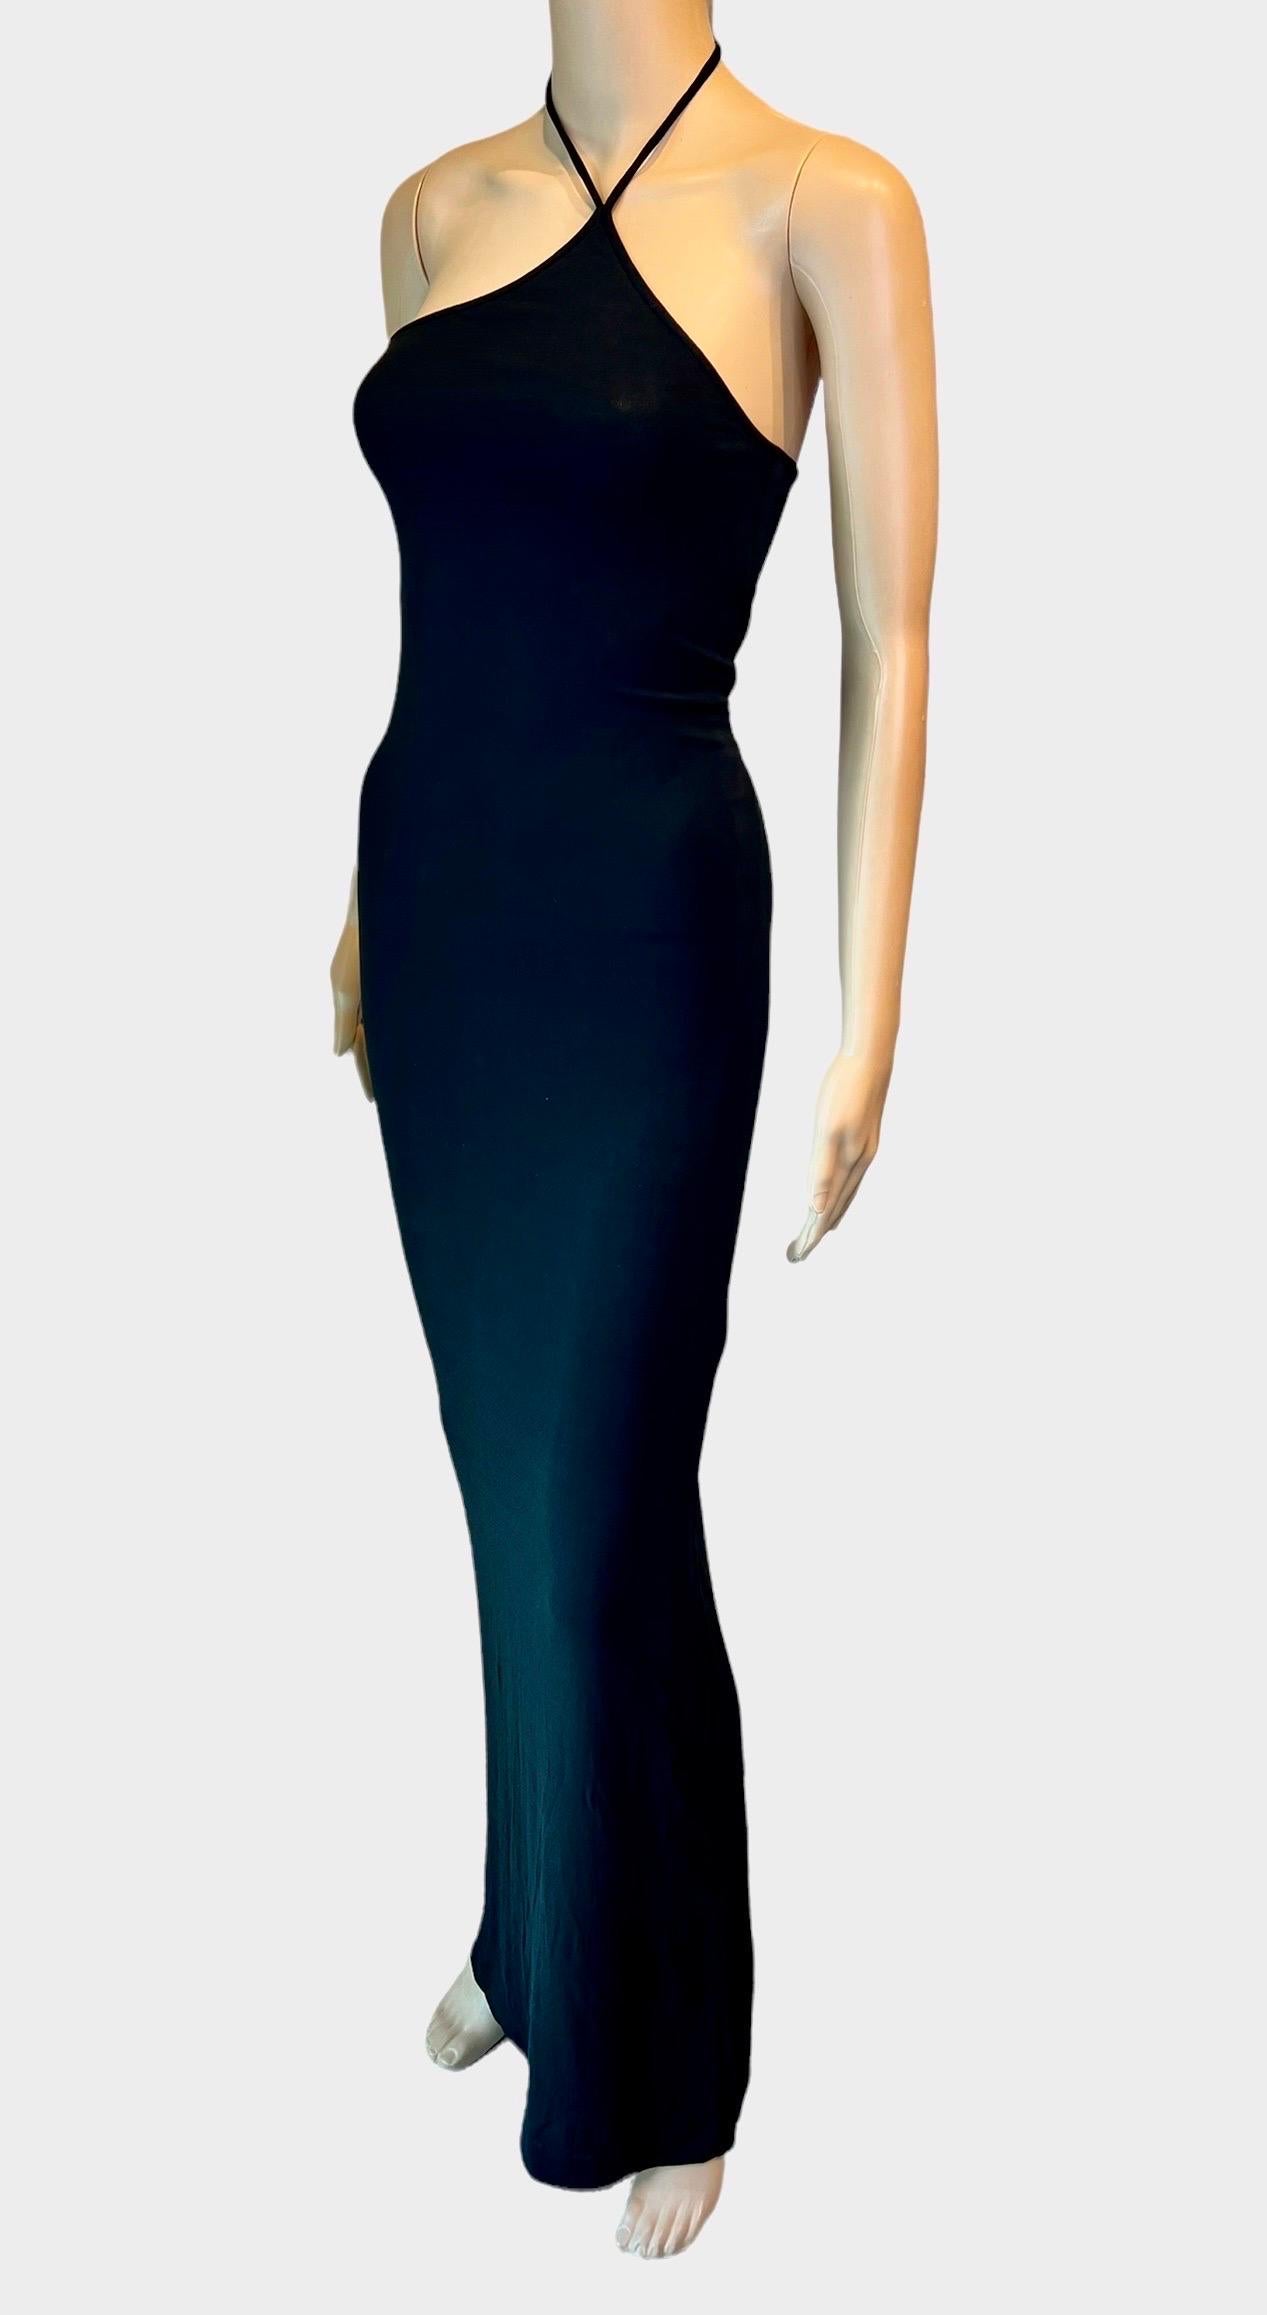 Tom Ford for Gucci F/W 1997 Asymmetrical Halter Bodycon Black Evening Dress Gown For Sale 4